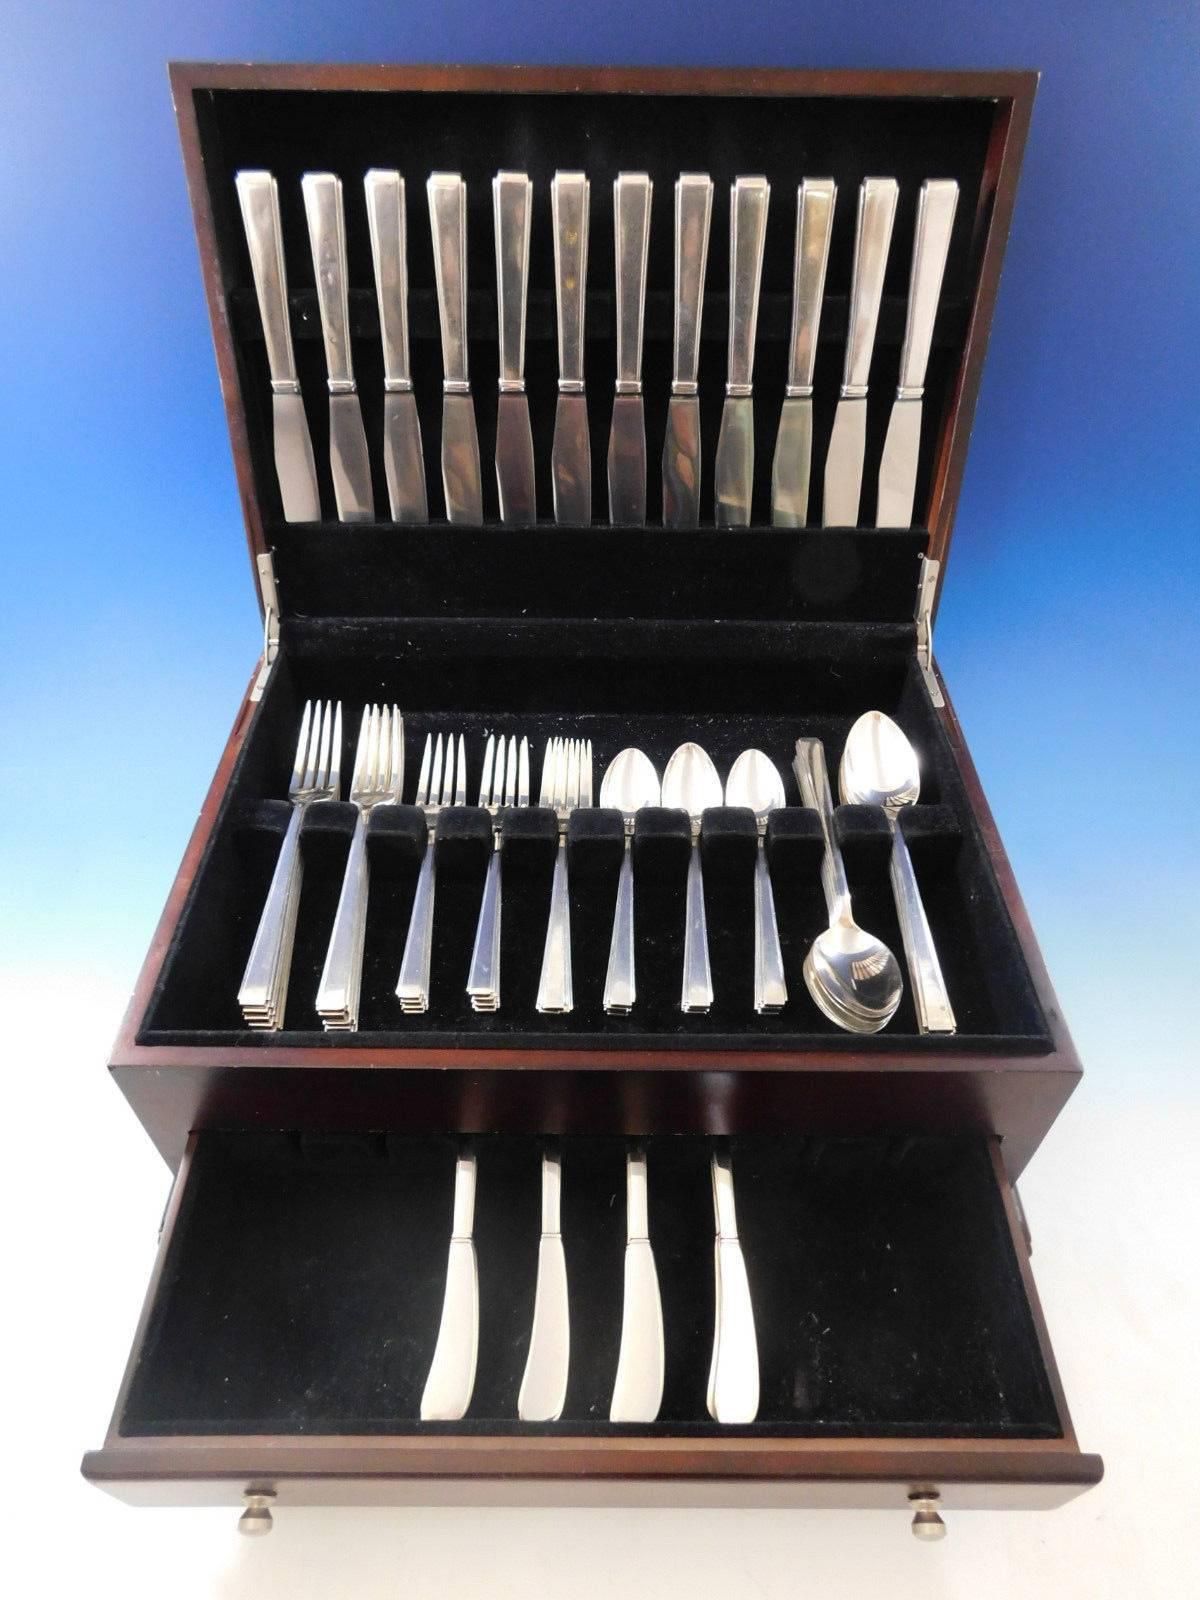 Modern Classic by Lunt sterling silver flatware set, 72 pieces. This set includes:

12 knives, 8 7/8